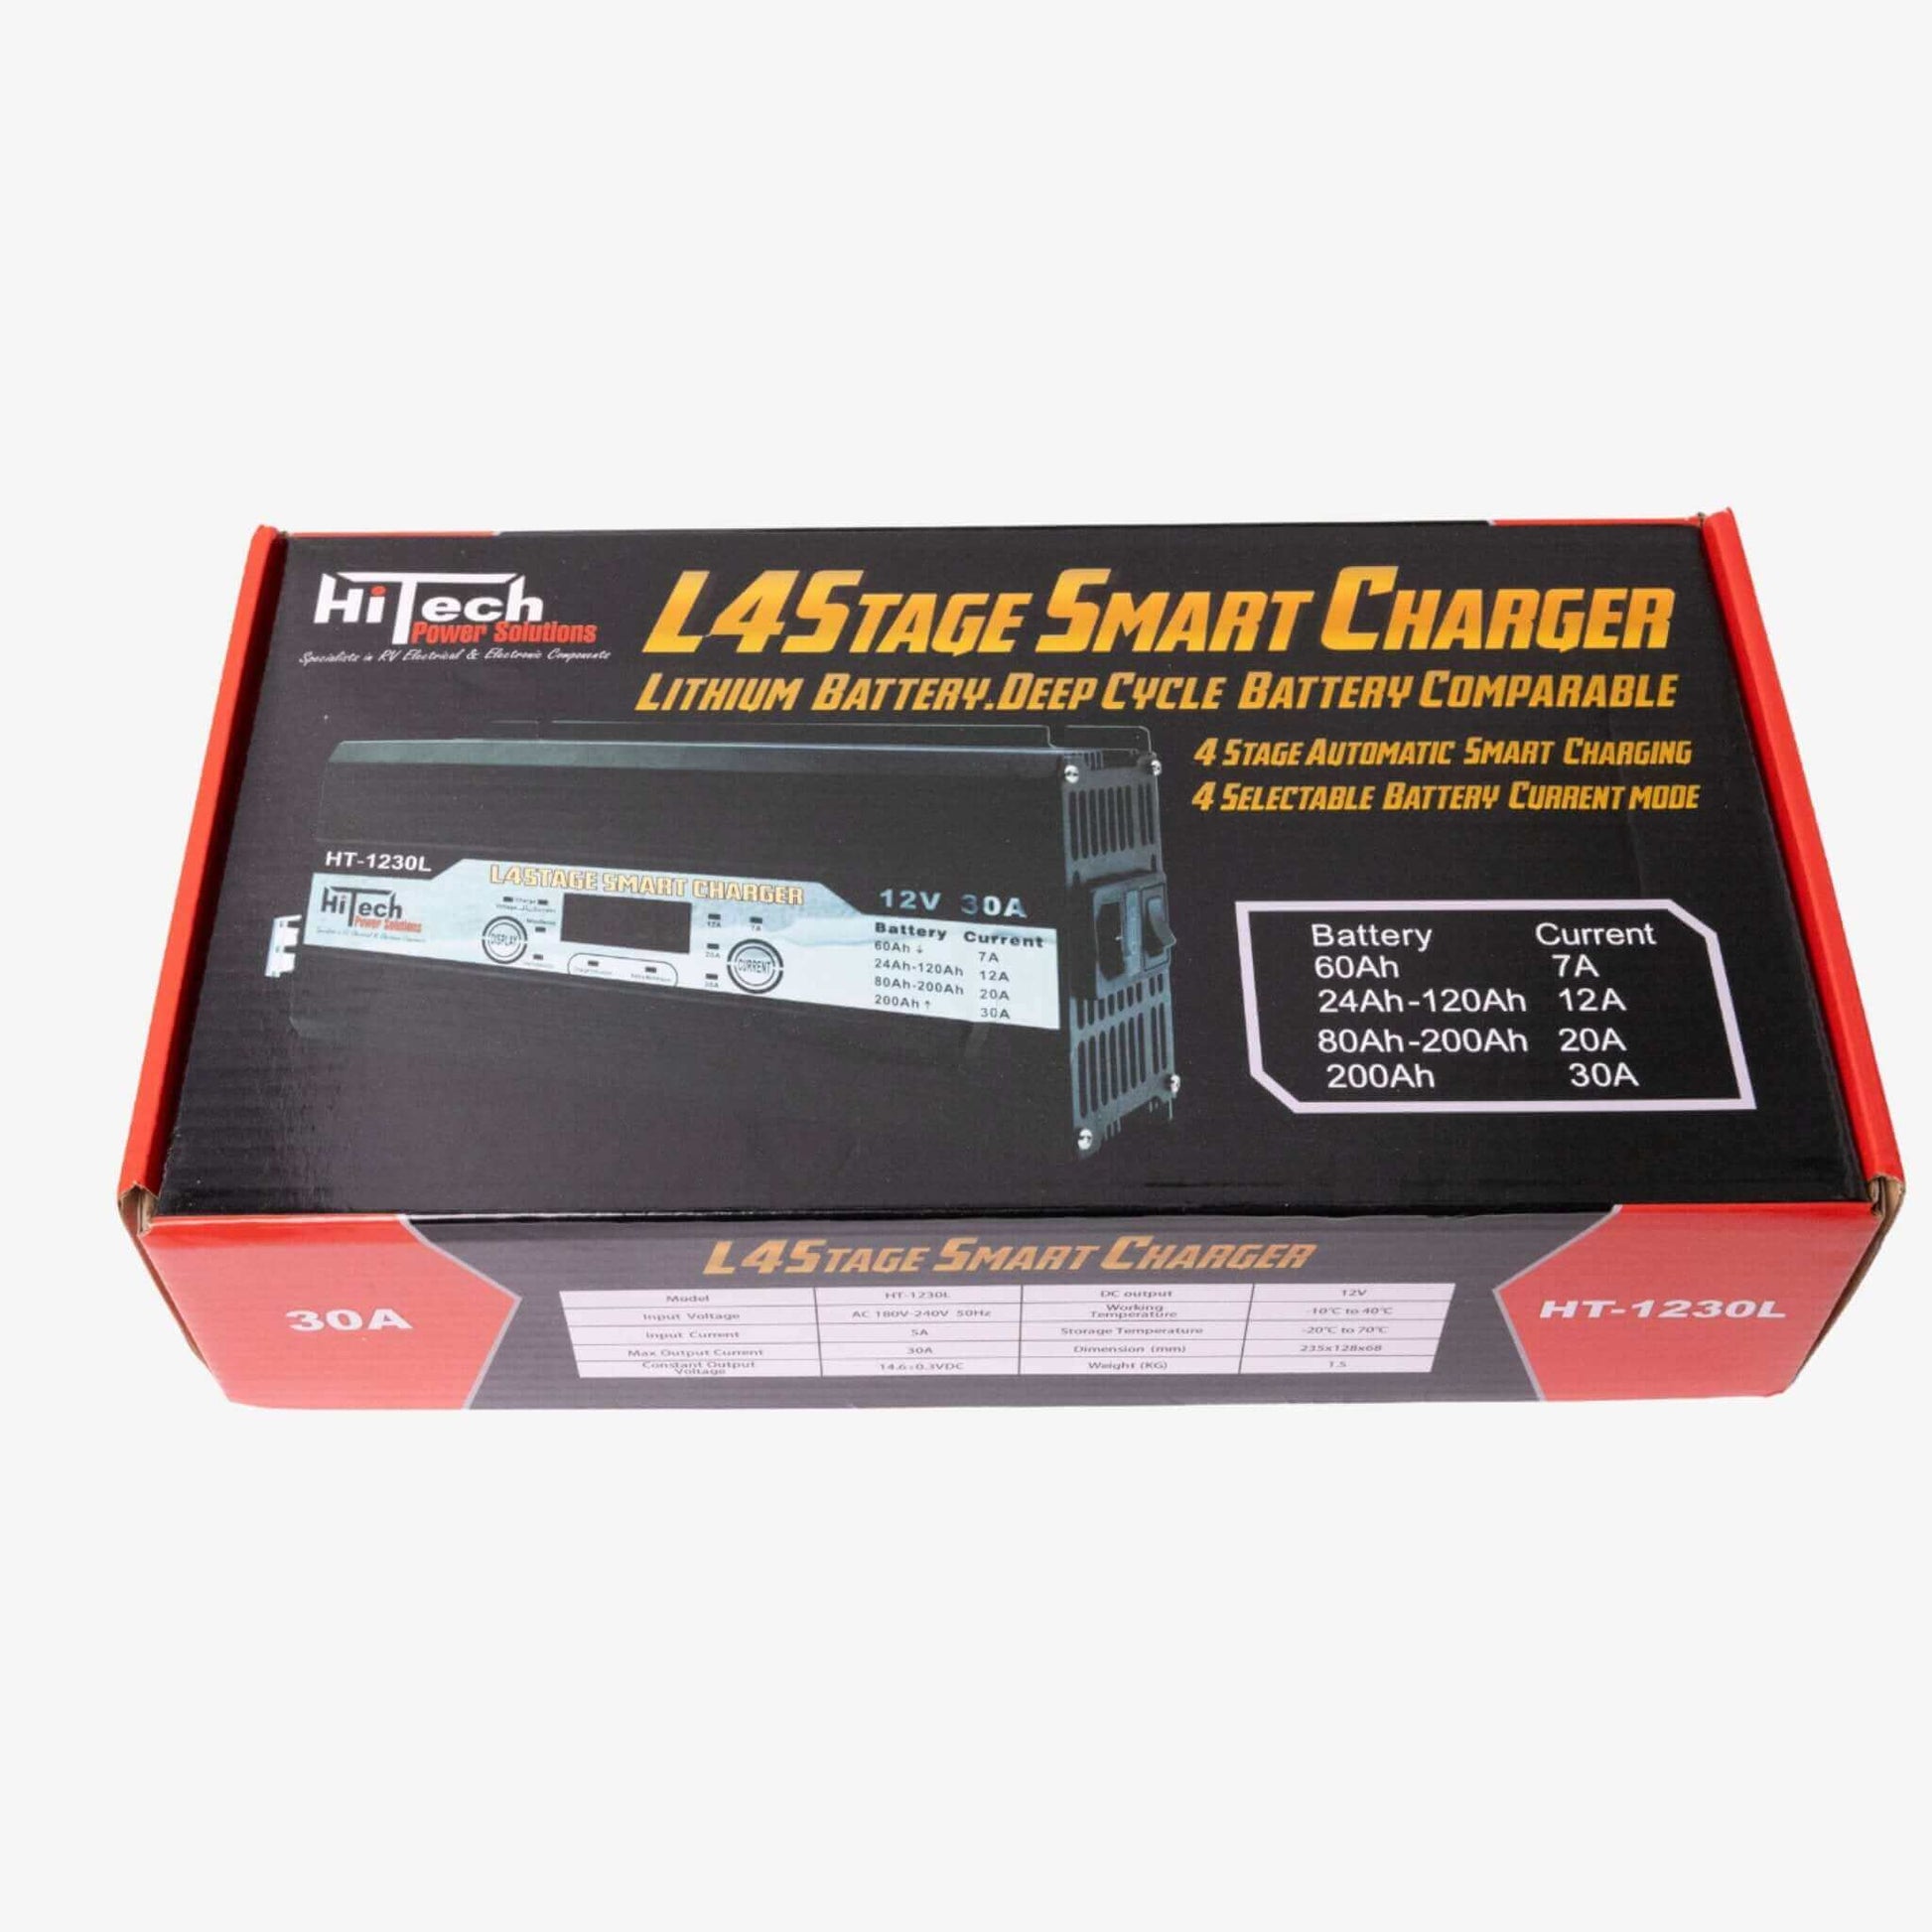 HiTech HT-1230: 4-Stage Smart Battery Charger & 12V Power Adapter (30A, Lithium Compatible) - RV Essentials Australia